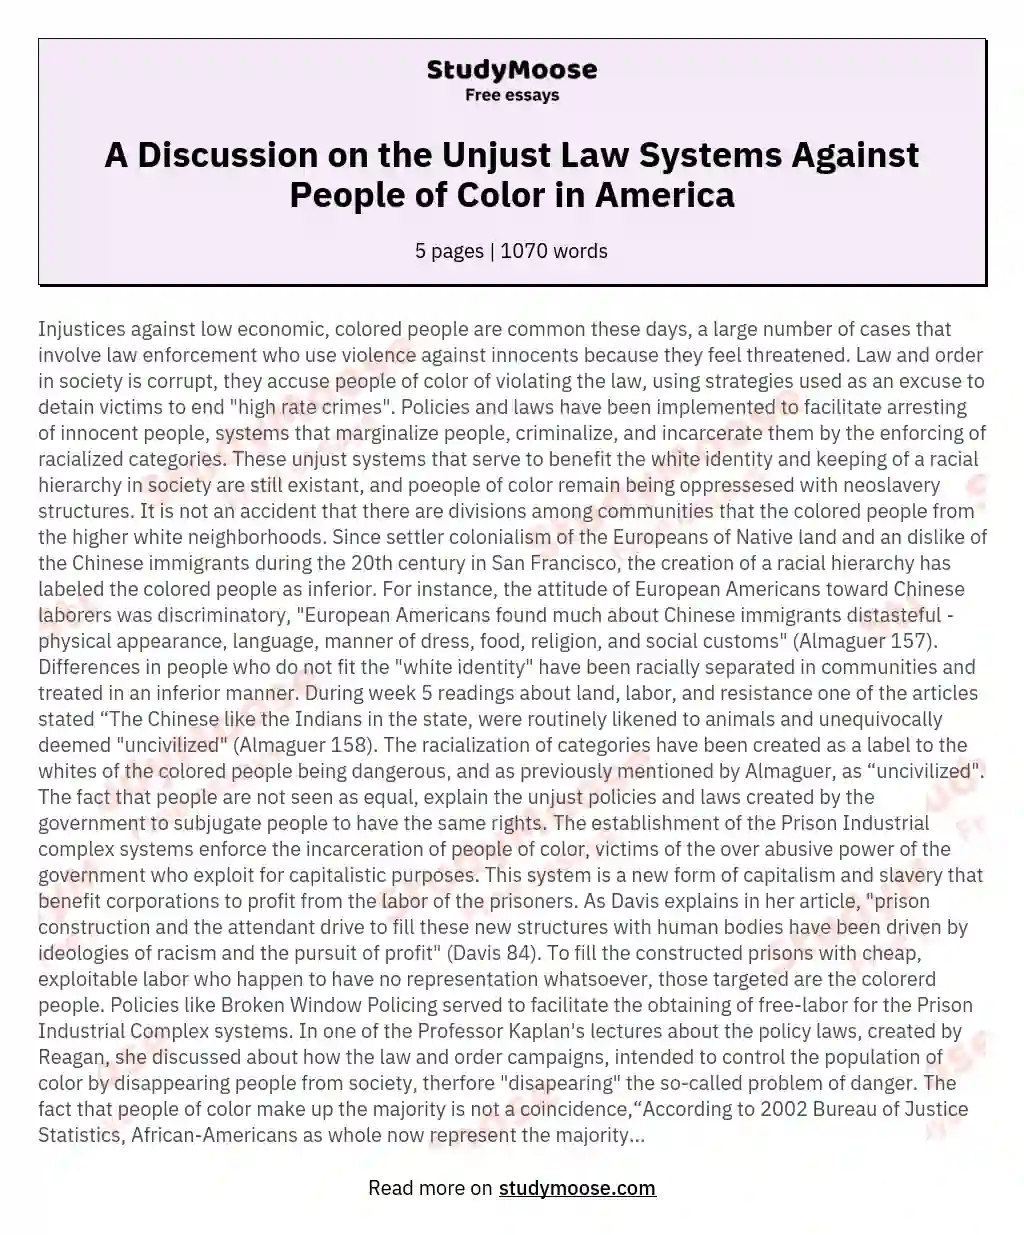 A Discussion on the Unjust Law Systems Against People of Color in America essay